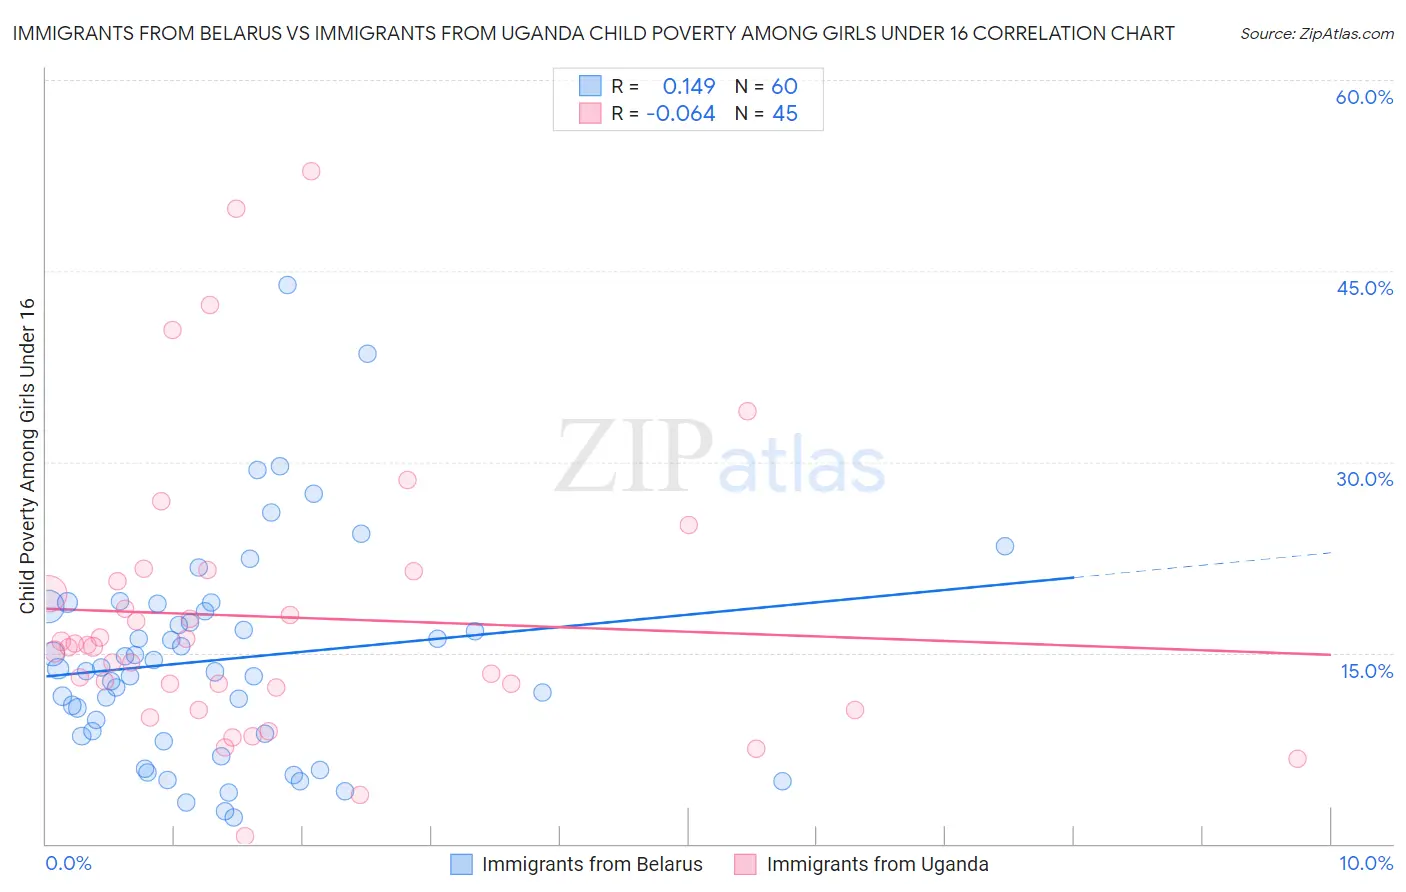 Immigrants from Belarus vs Immigrants from Uganda Child Poverty Among Girls Under 16